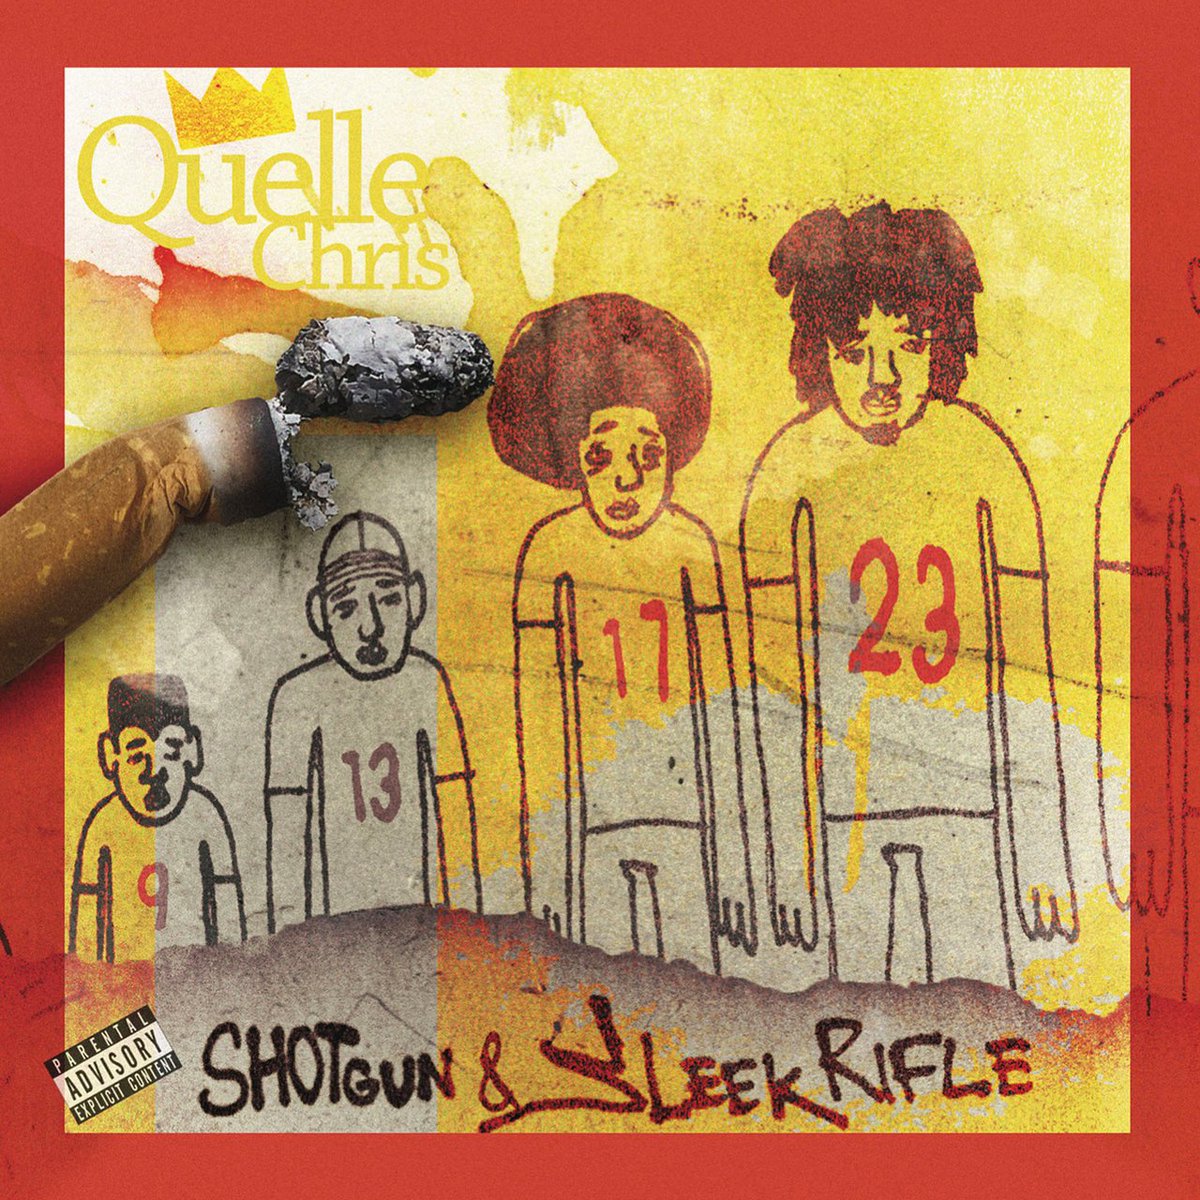 Listen to Slaves by Quelle Chris, Roc Marciano tidal.com/track/20274826…